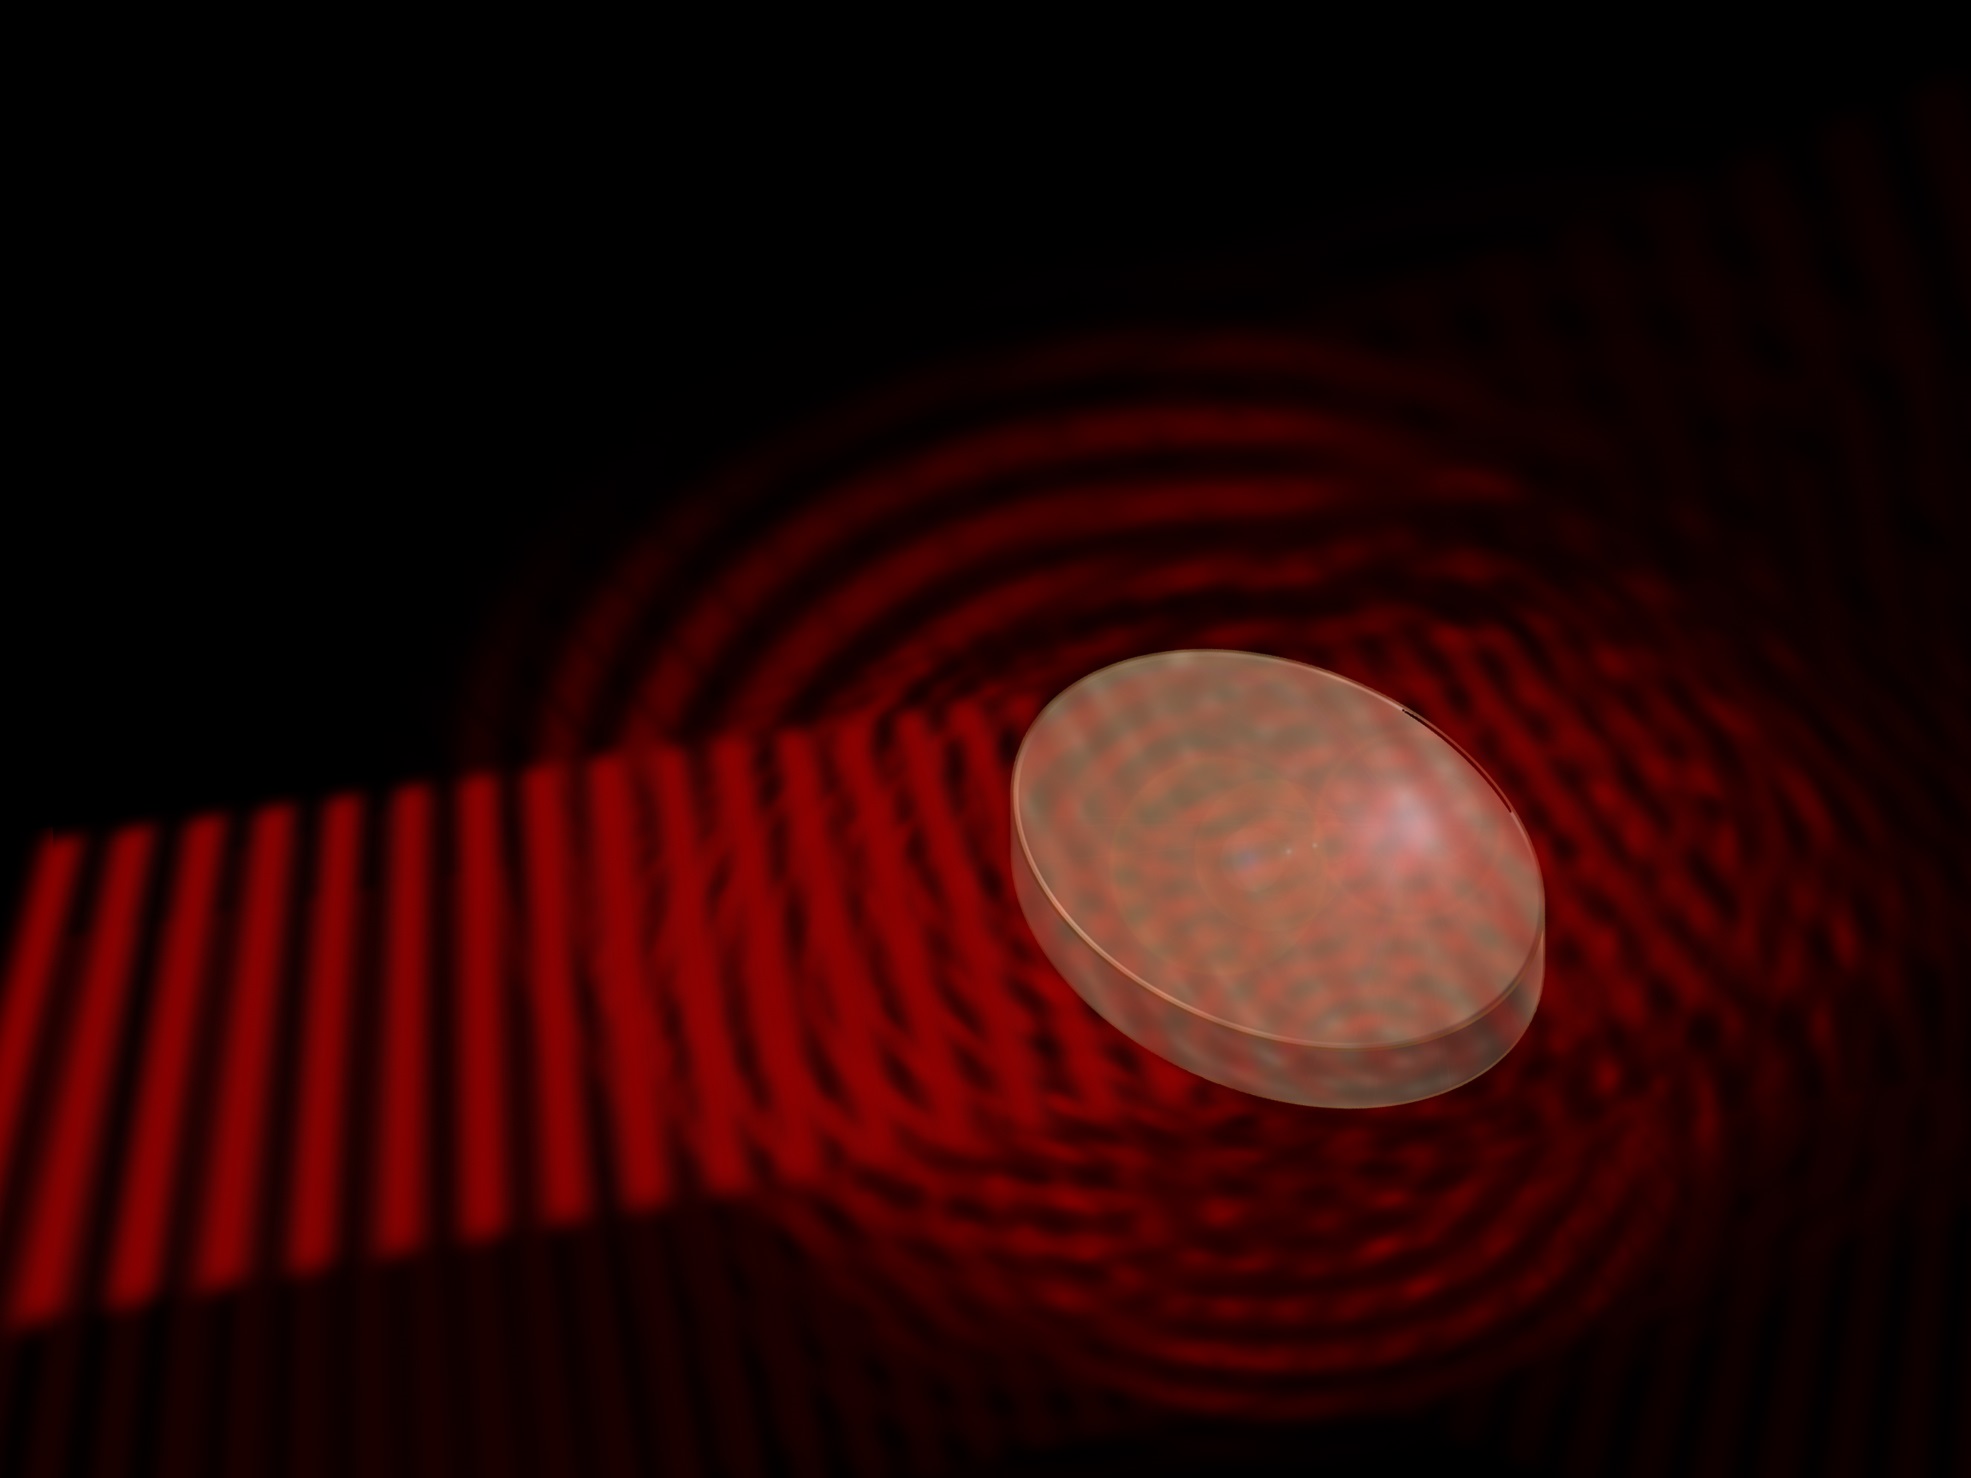 A material with random irregularities scatters an incident light wave into all directions.